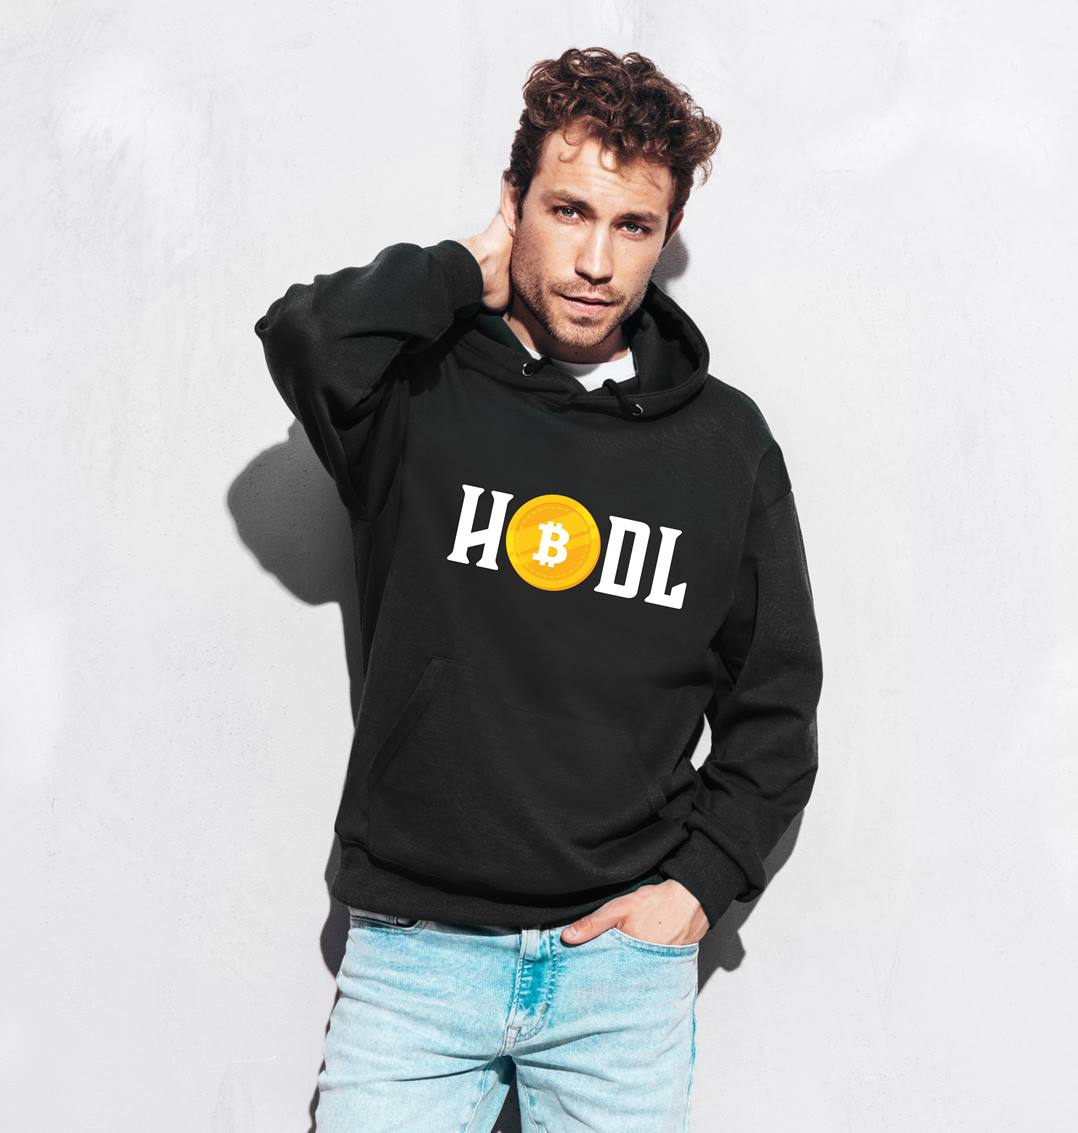 Hoodie - Bitcoin HODL (gold)